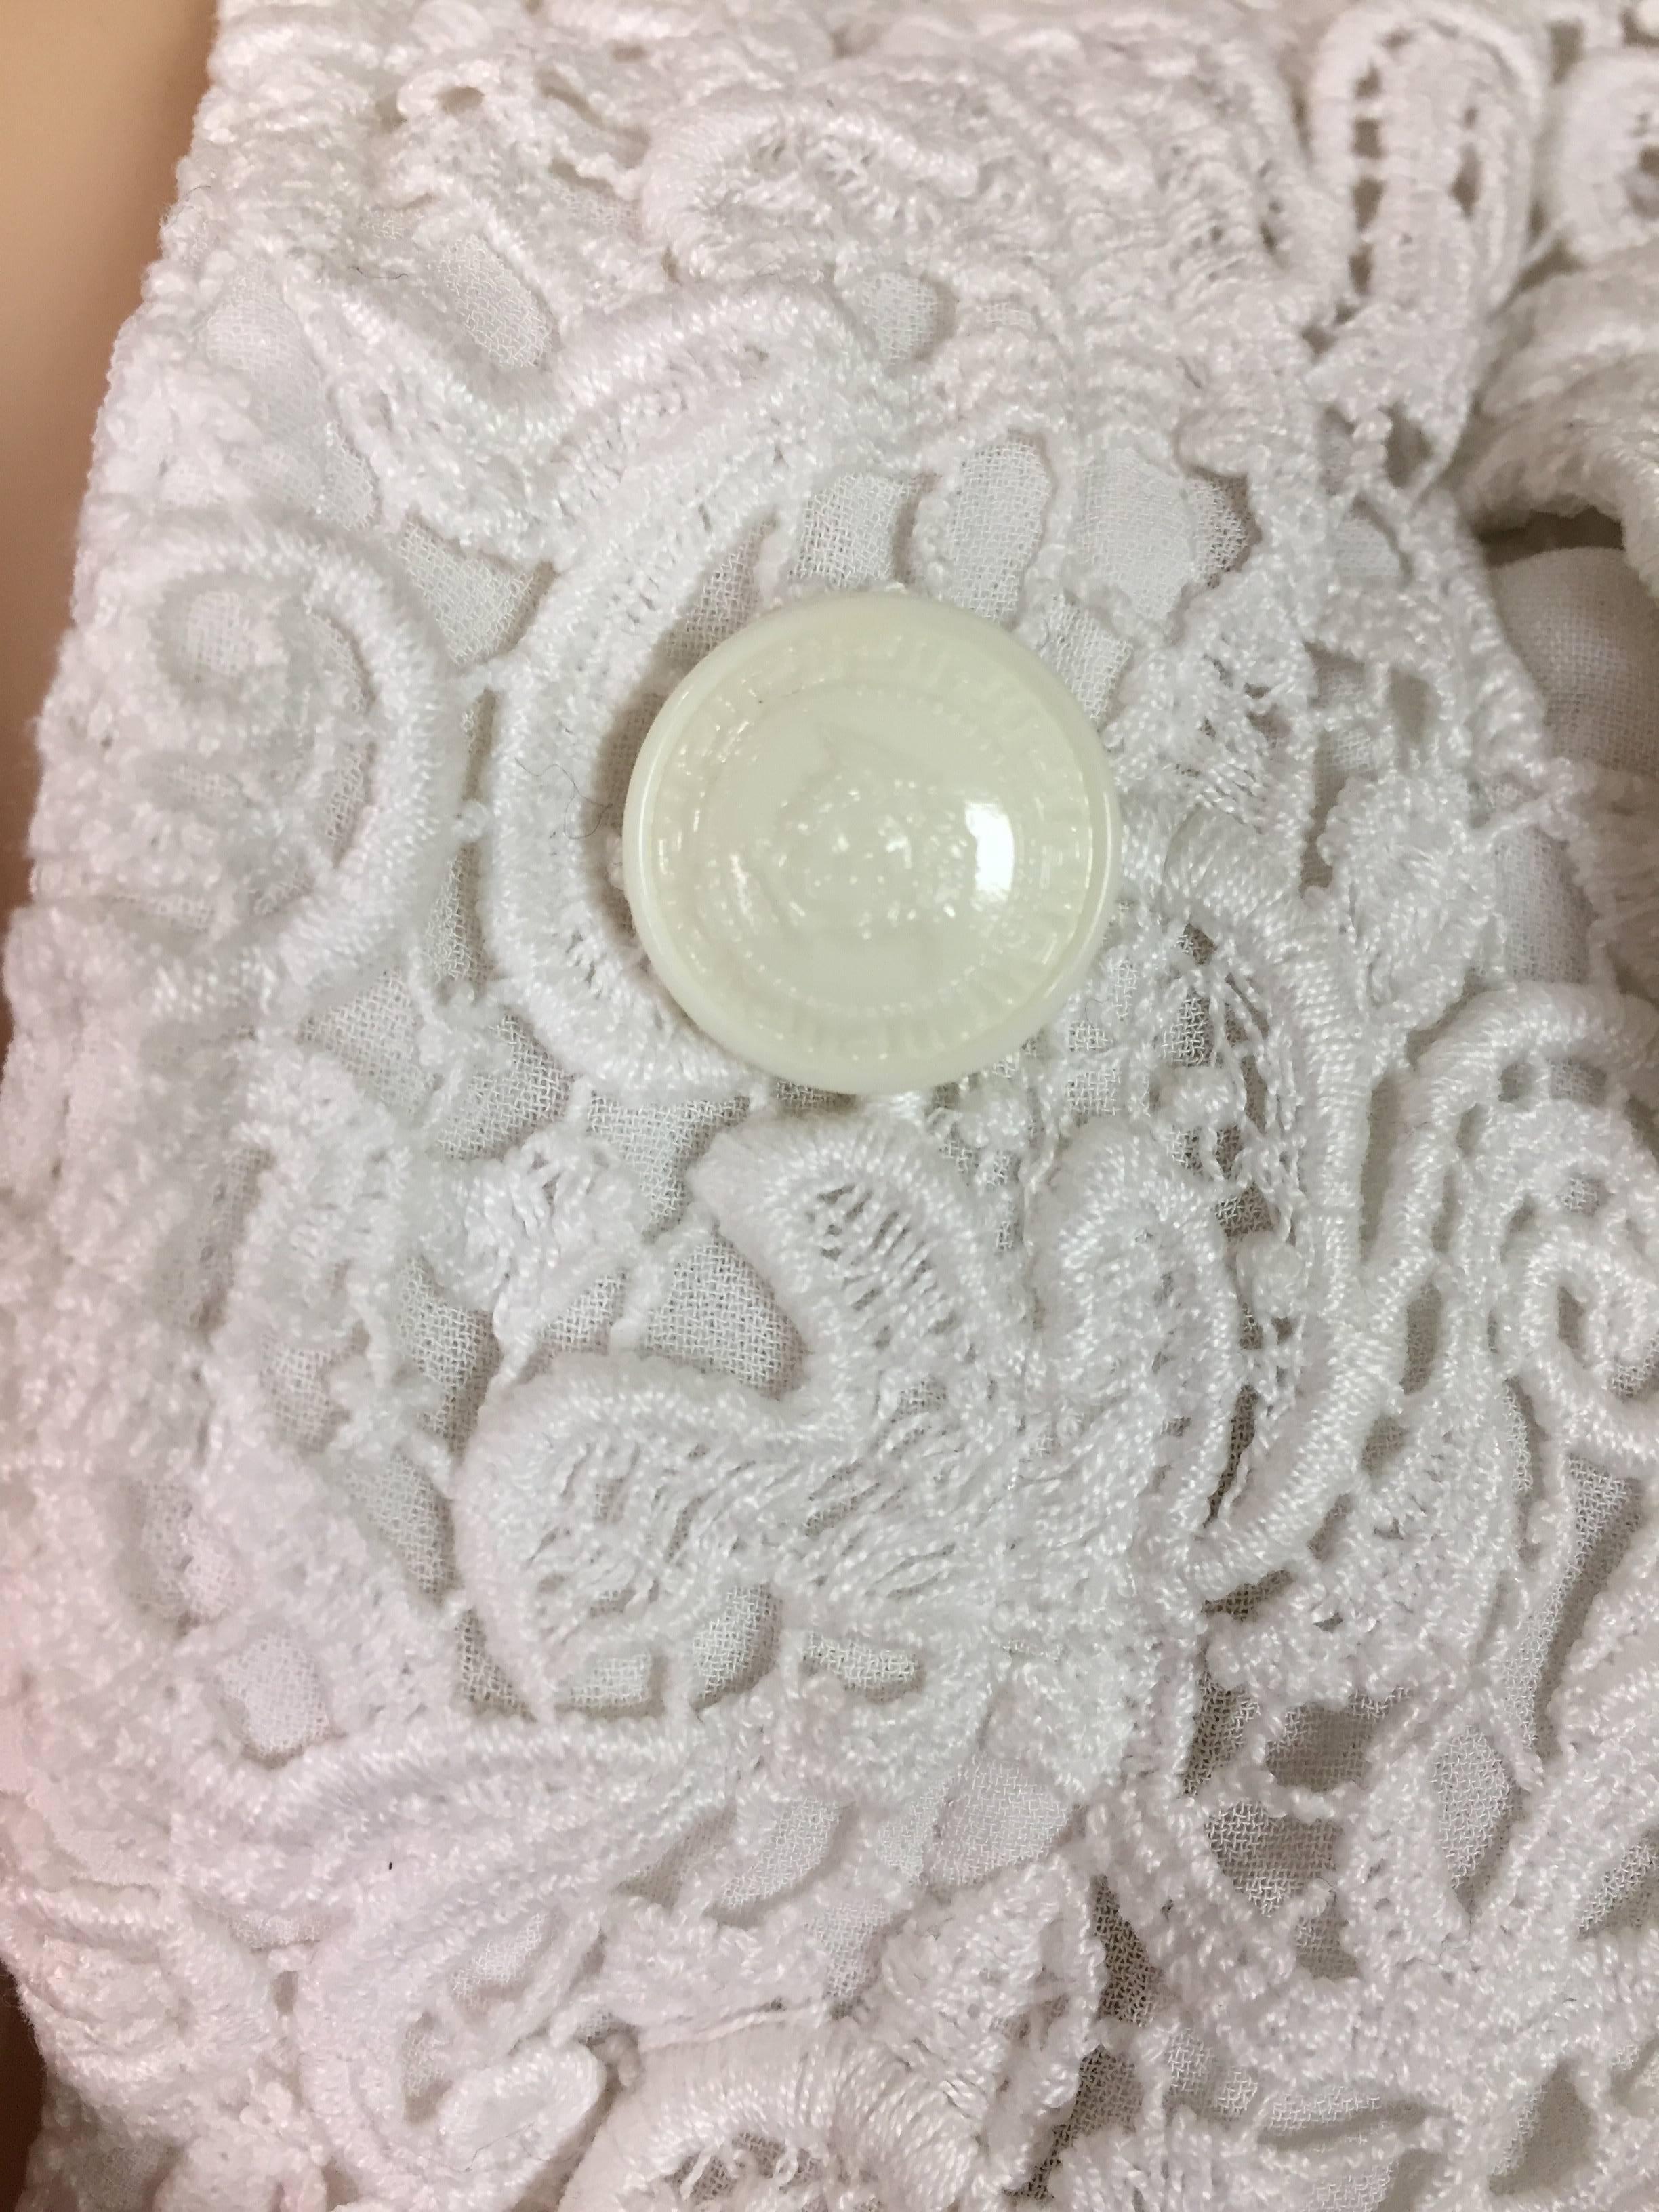 S/S 1994 Gianni Versace Sheer White Lace Cropped Short Jacket 38 In Good Condition In Yukon, OK